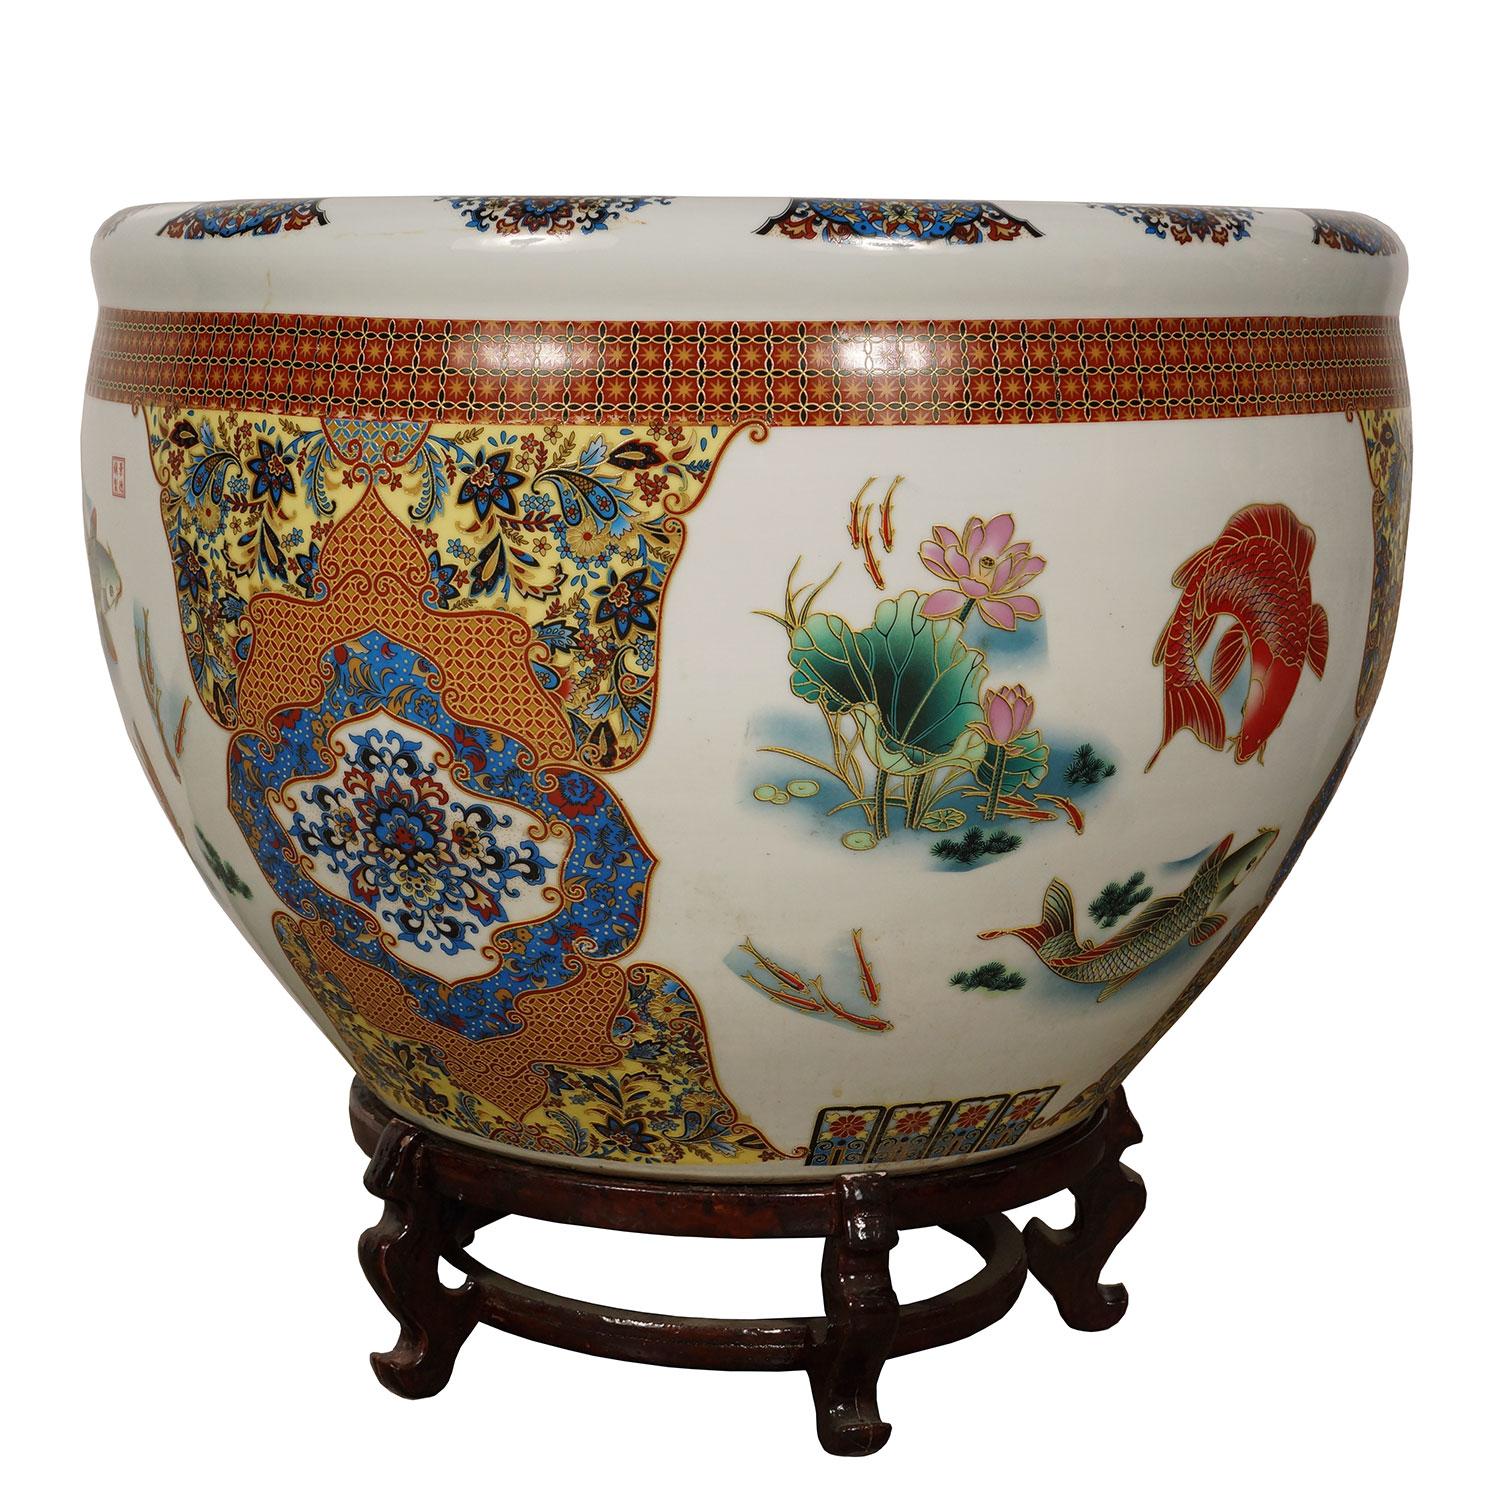 Early 20th Century Antique Chinese Famille Rose Porcelain Fish Bowl, Planter For Sale 1